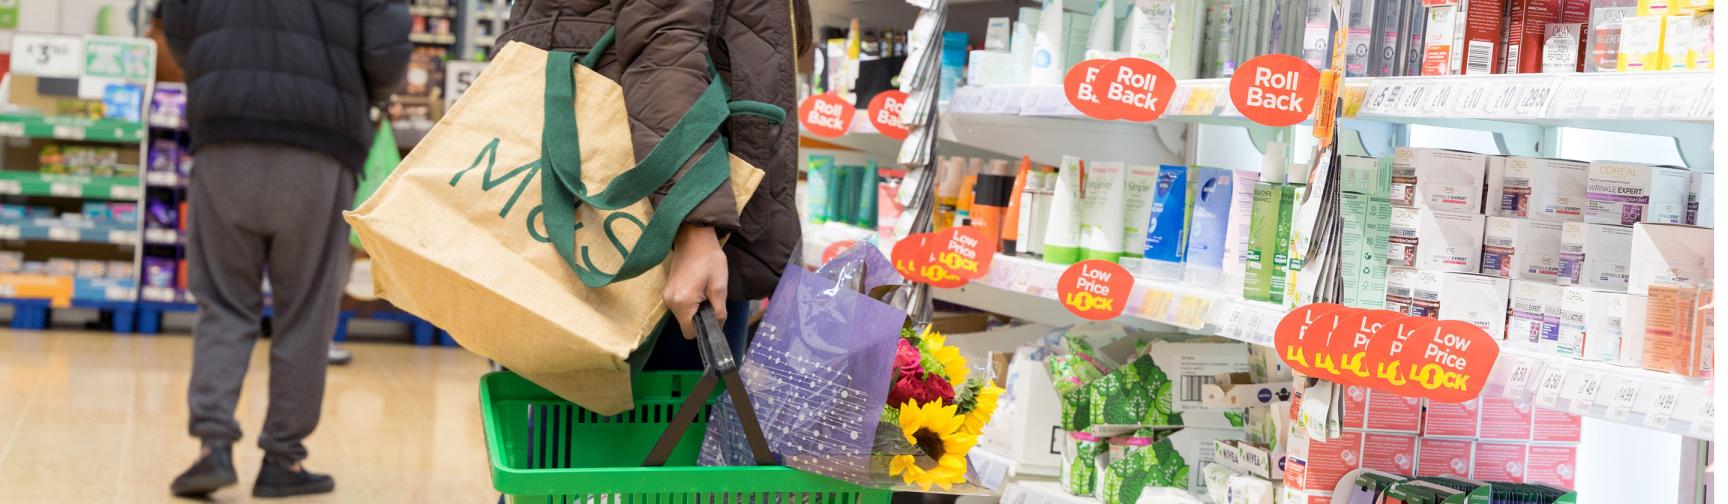 A woman carrying a supermarket shopping basket looking at reduced priced items.